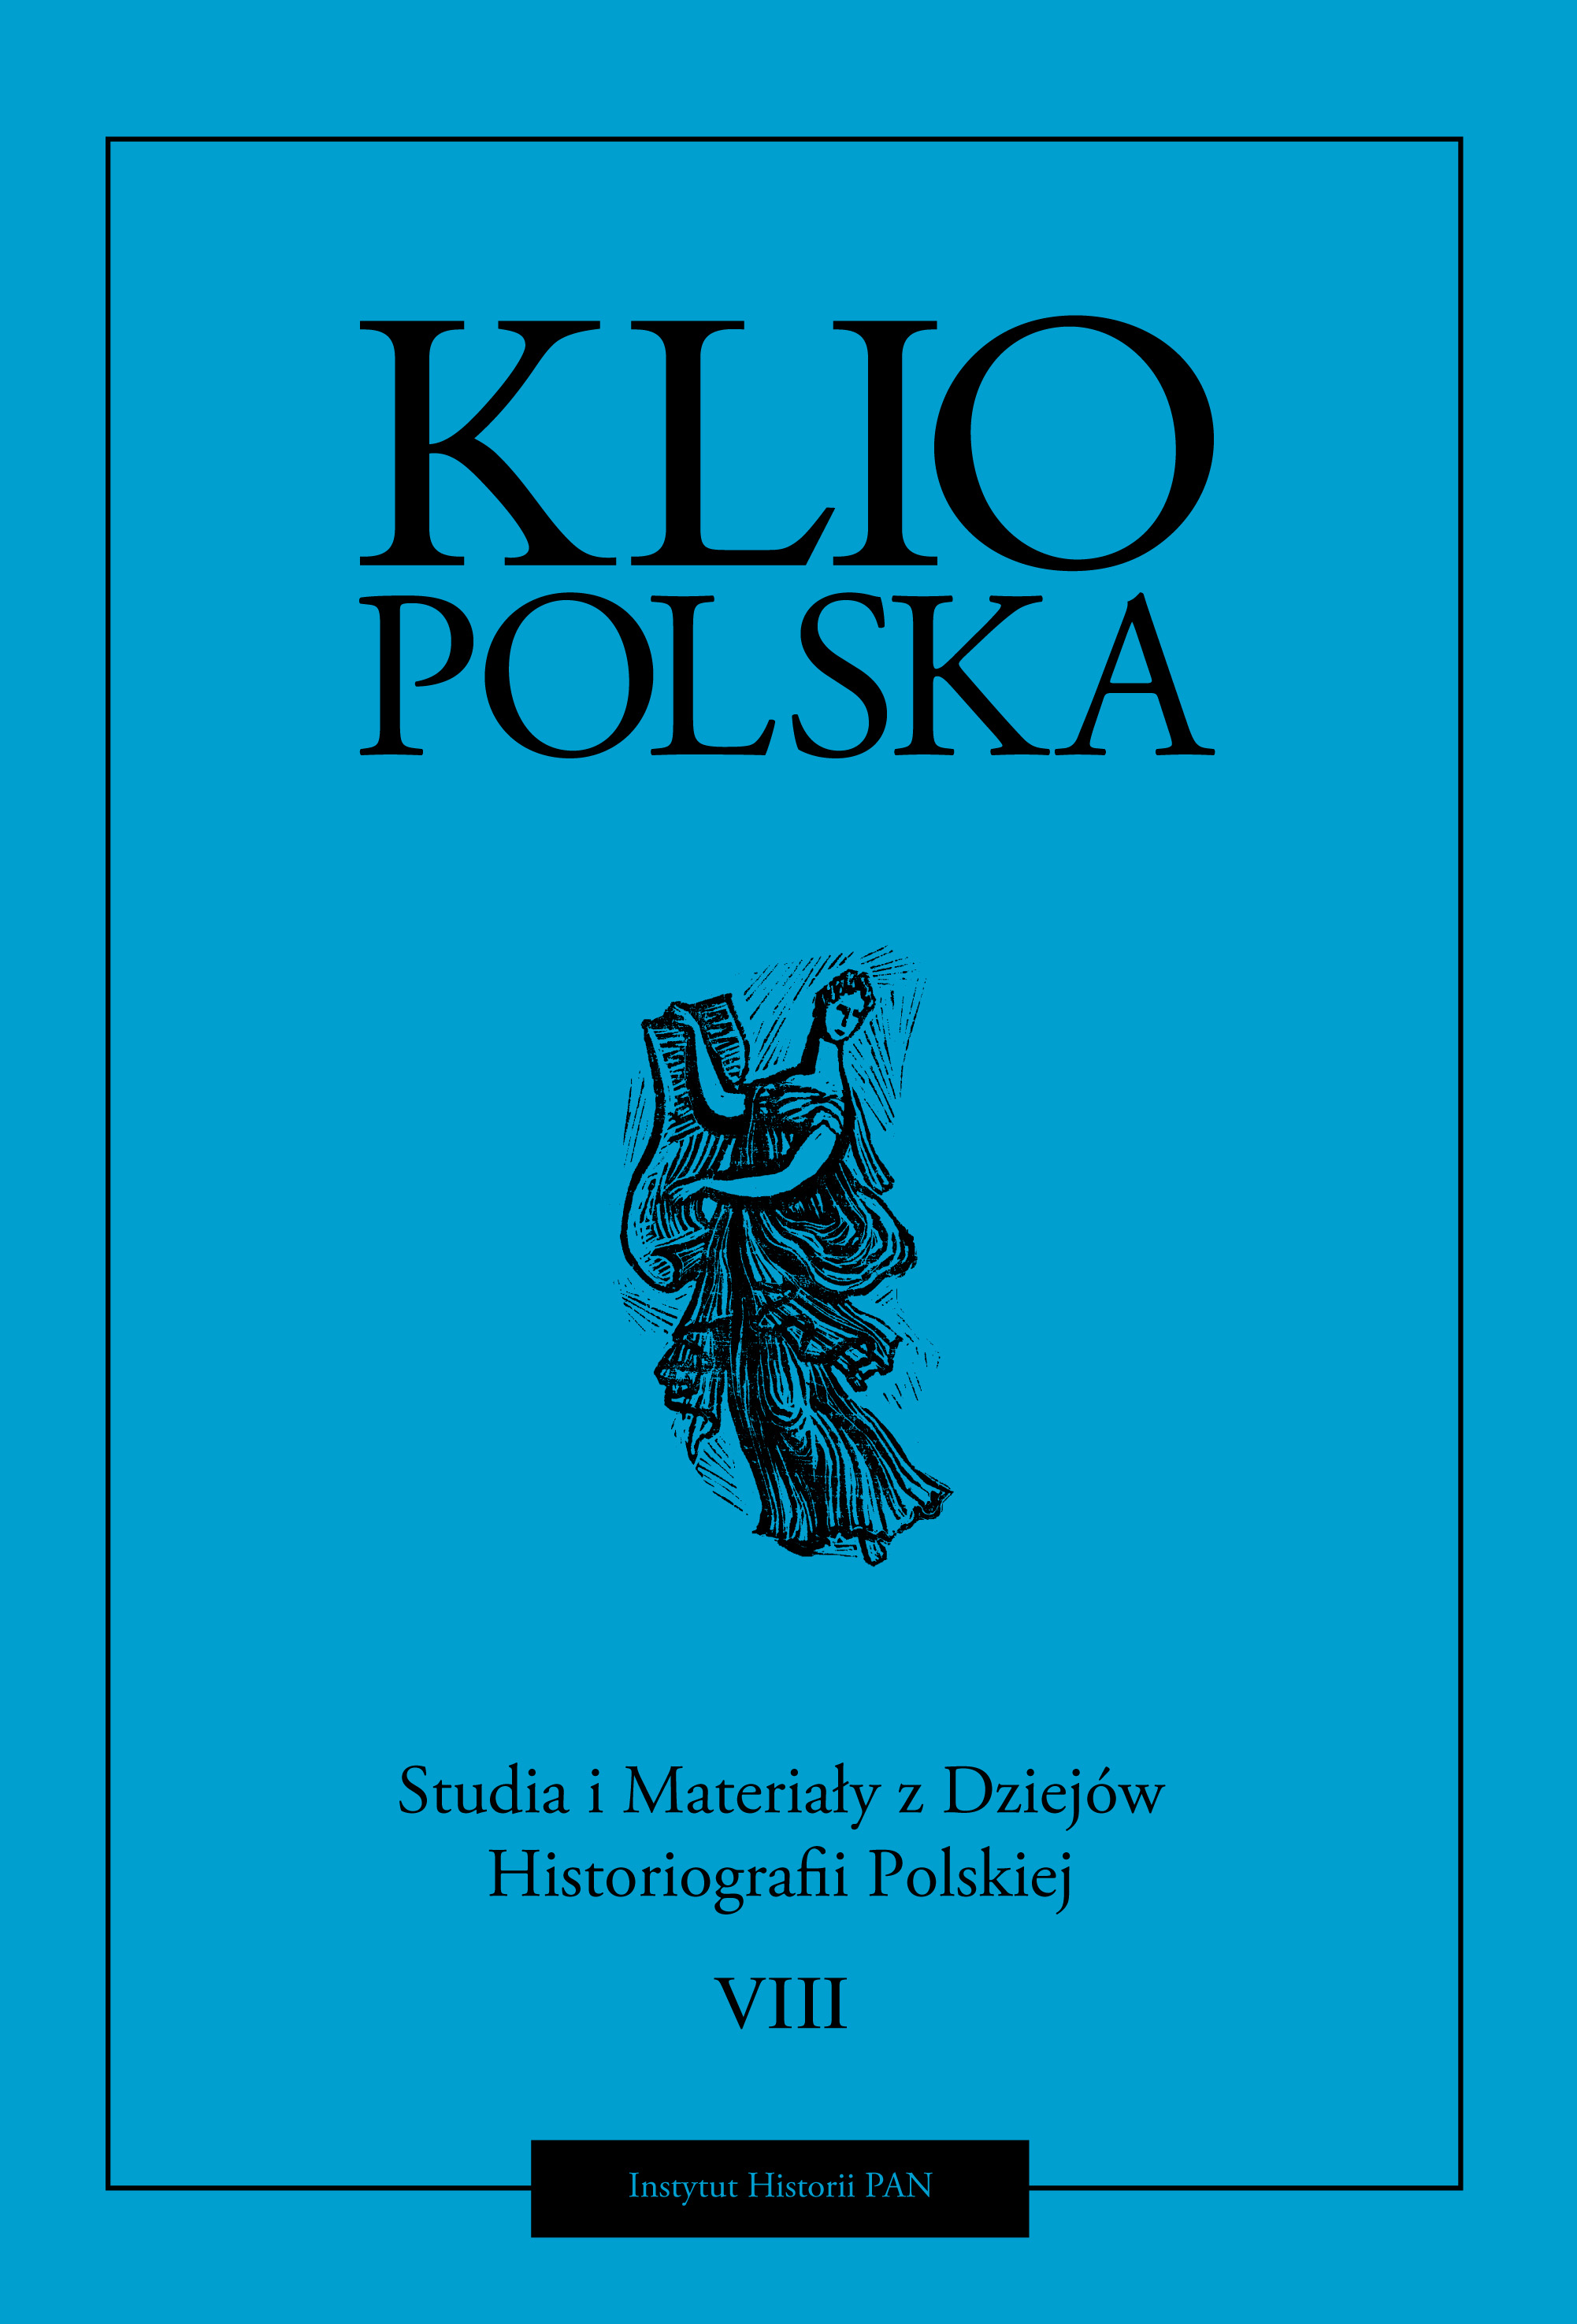 Between the endo and exogenesis of the Polish state: Polish-German historiographical polemics in the era of the Second Republic of Poland Cover Image